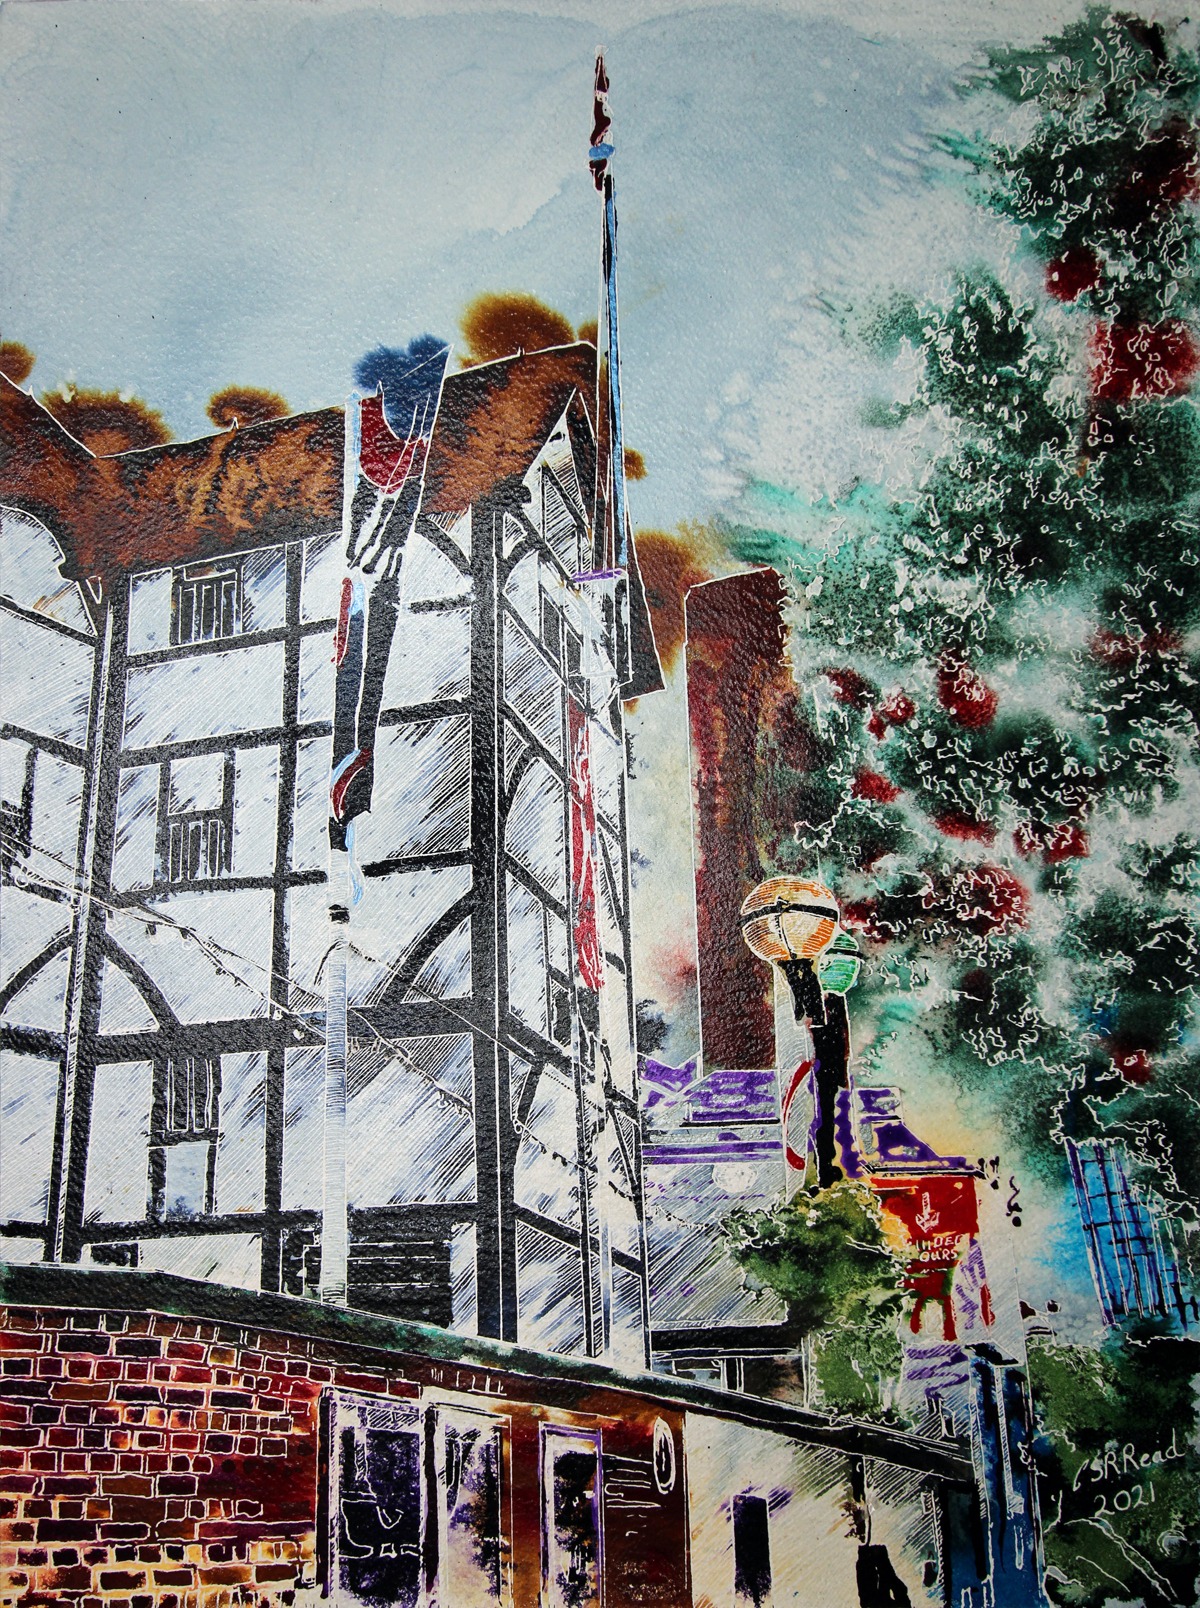 Globe Theatre - ©2021- Cathy Read - 61 x 45.7 x 2.3 cm, Watercolour and ink